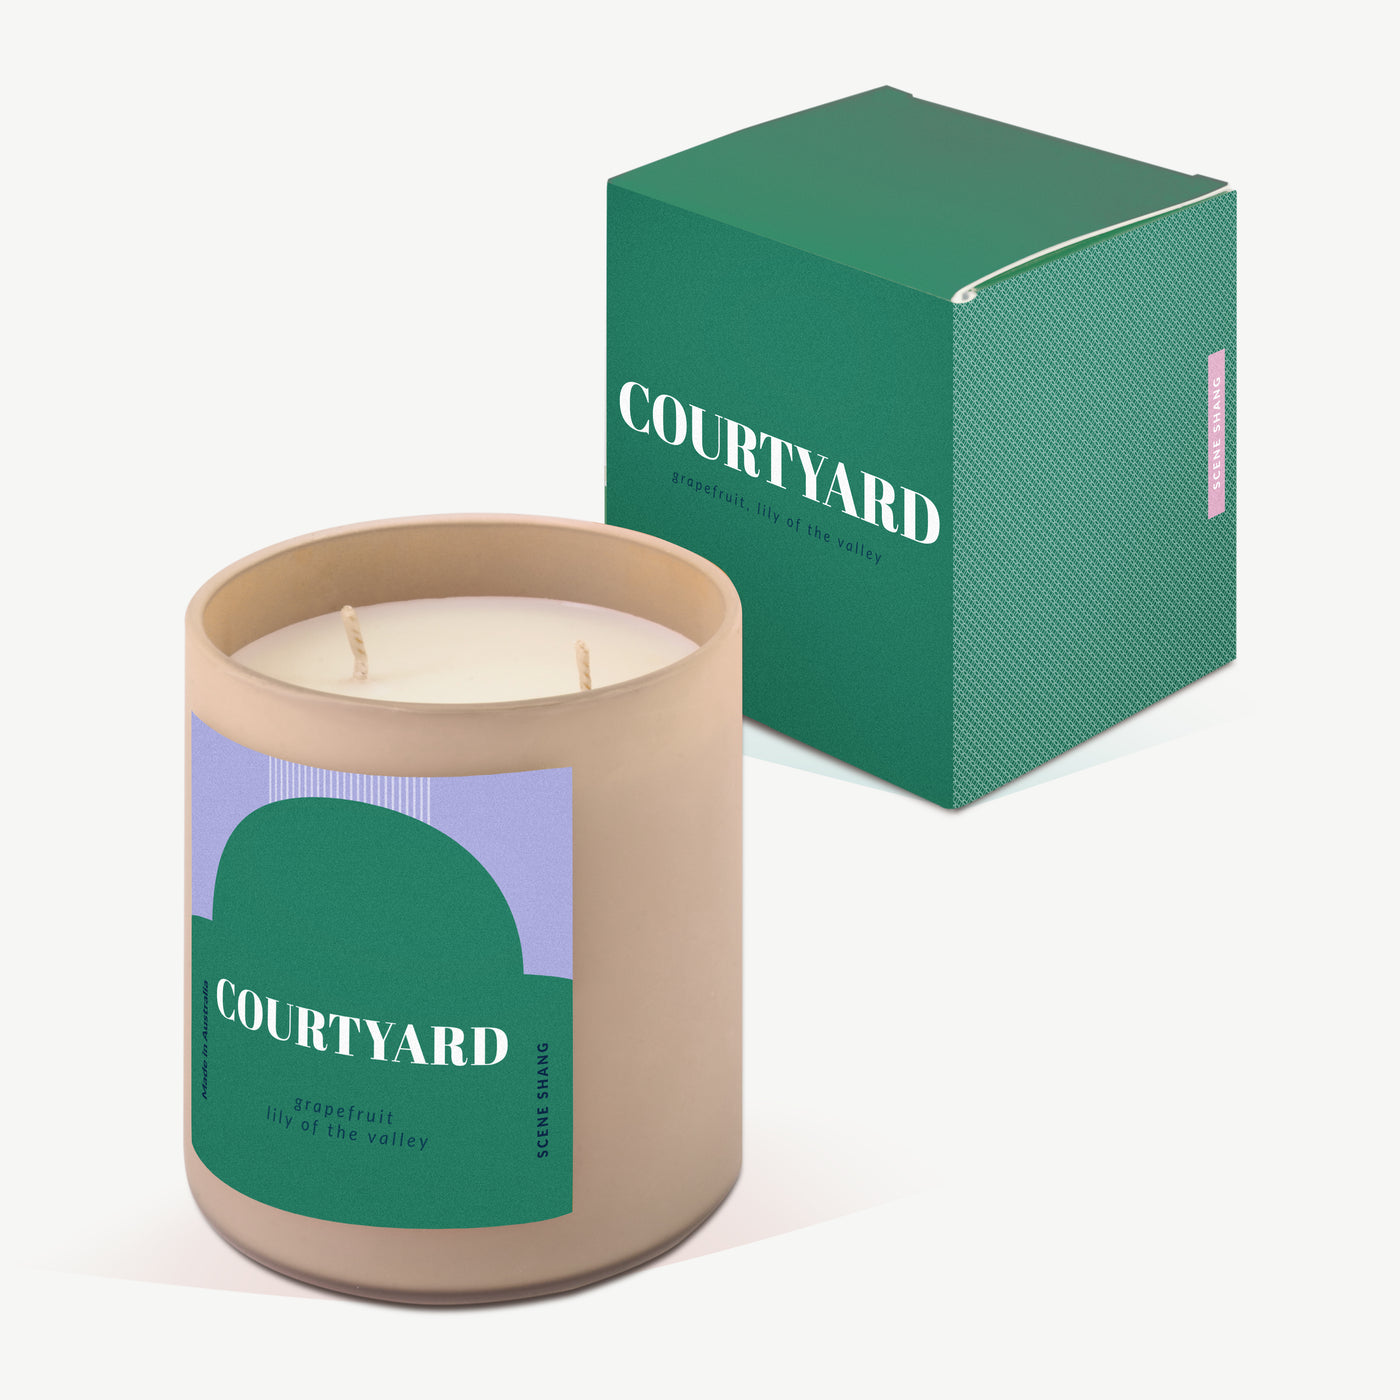 COURTYARD Triple Scented Soy Wax Candle (Grapefruit, Lily of the Valley)